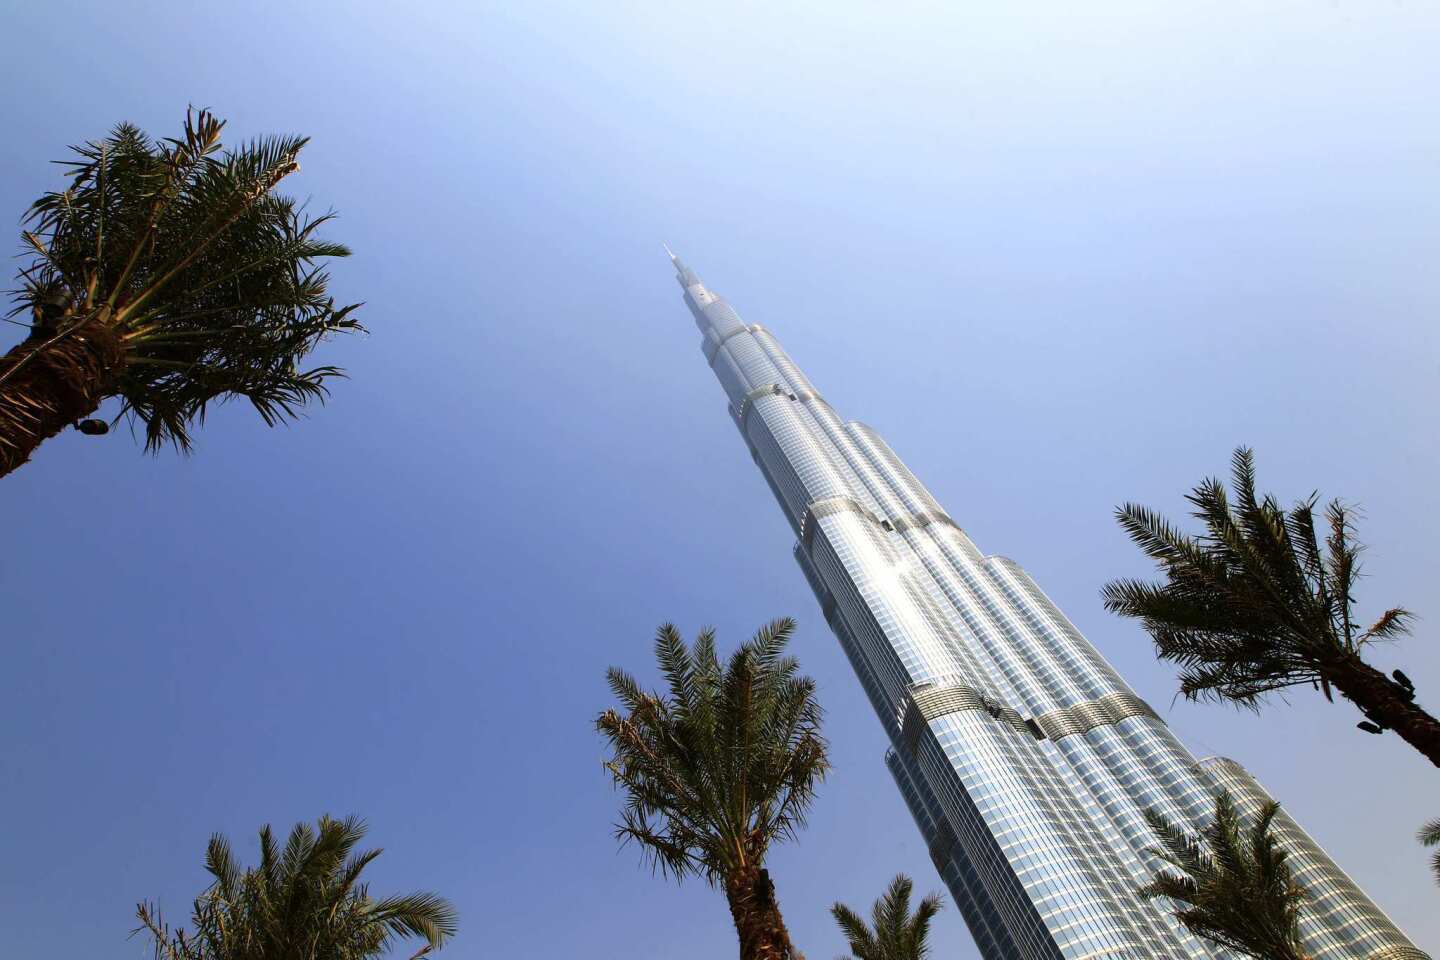 The Burj Khalifa, which debuted in 2010, is the world's tallest structure. It stands 2,717 feet high and has 163 floors.